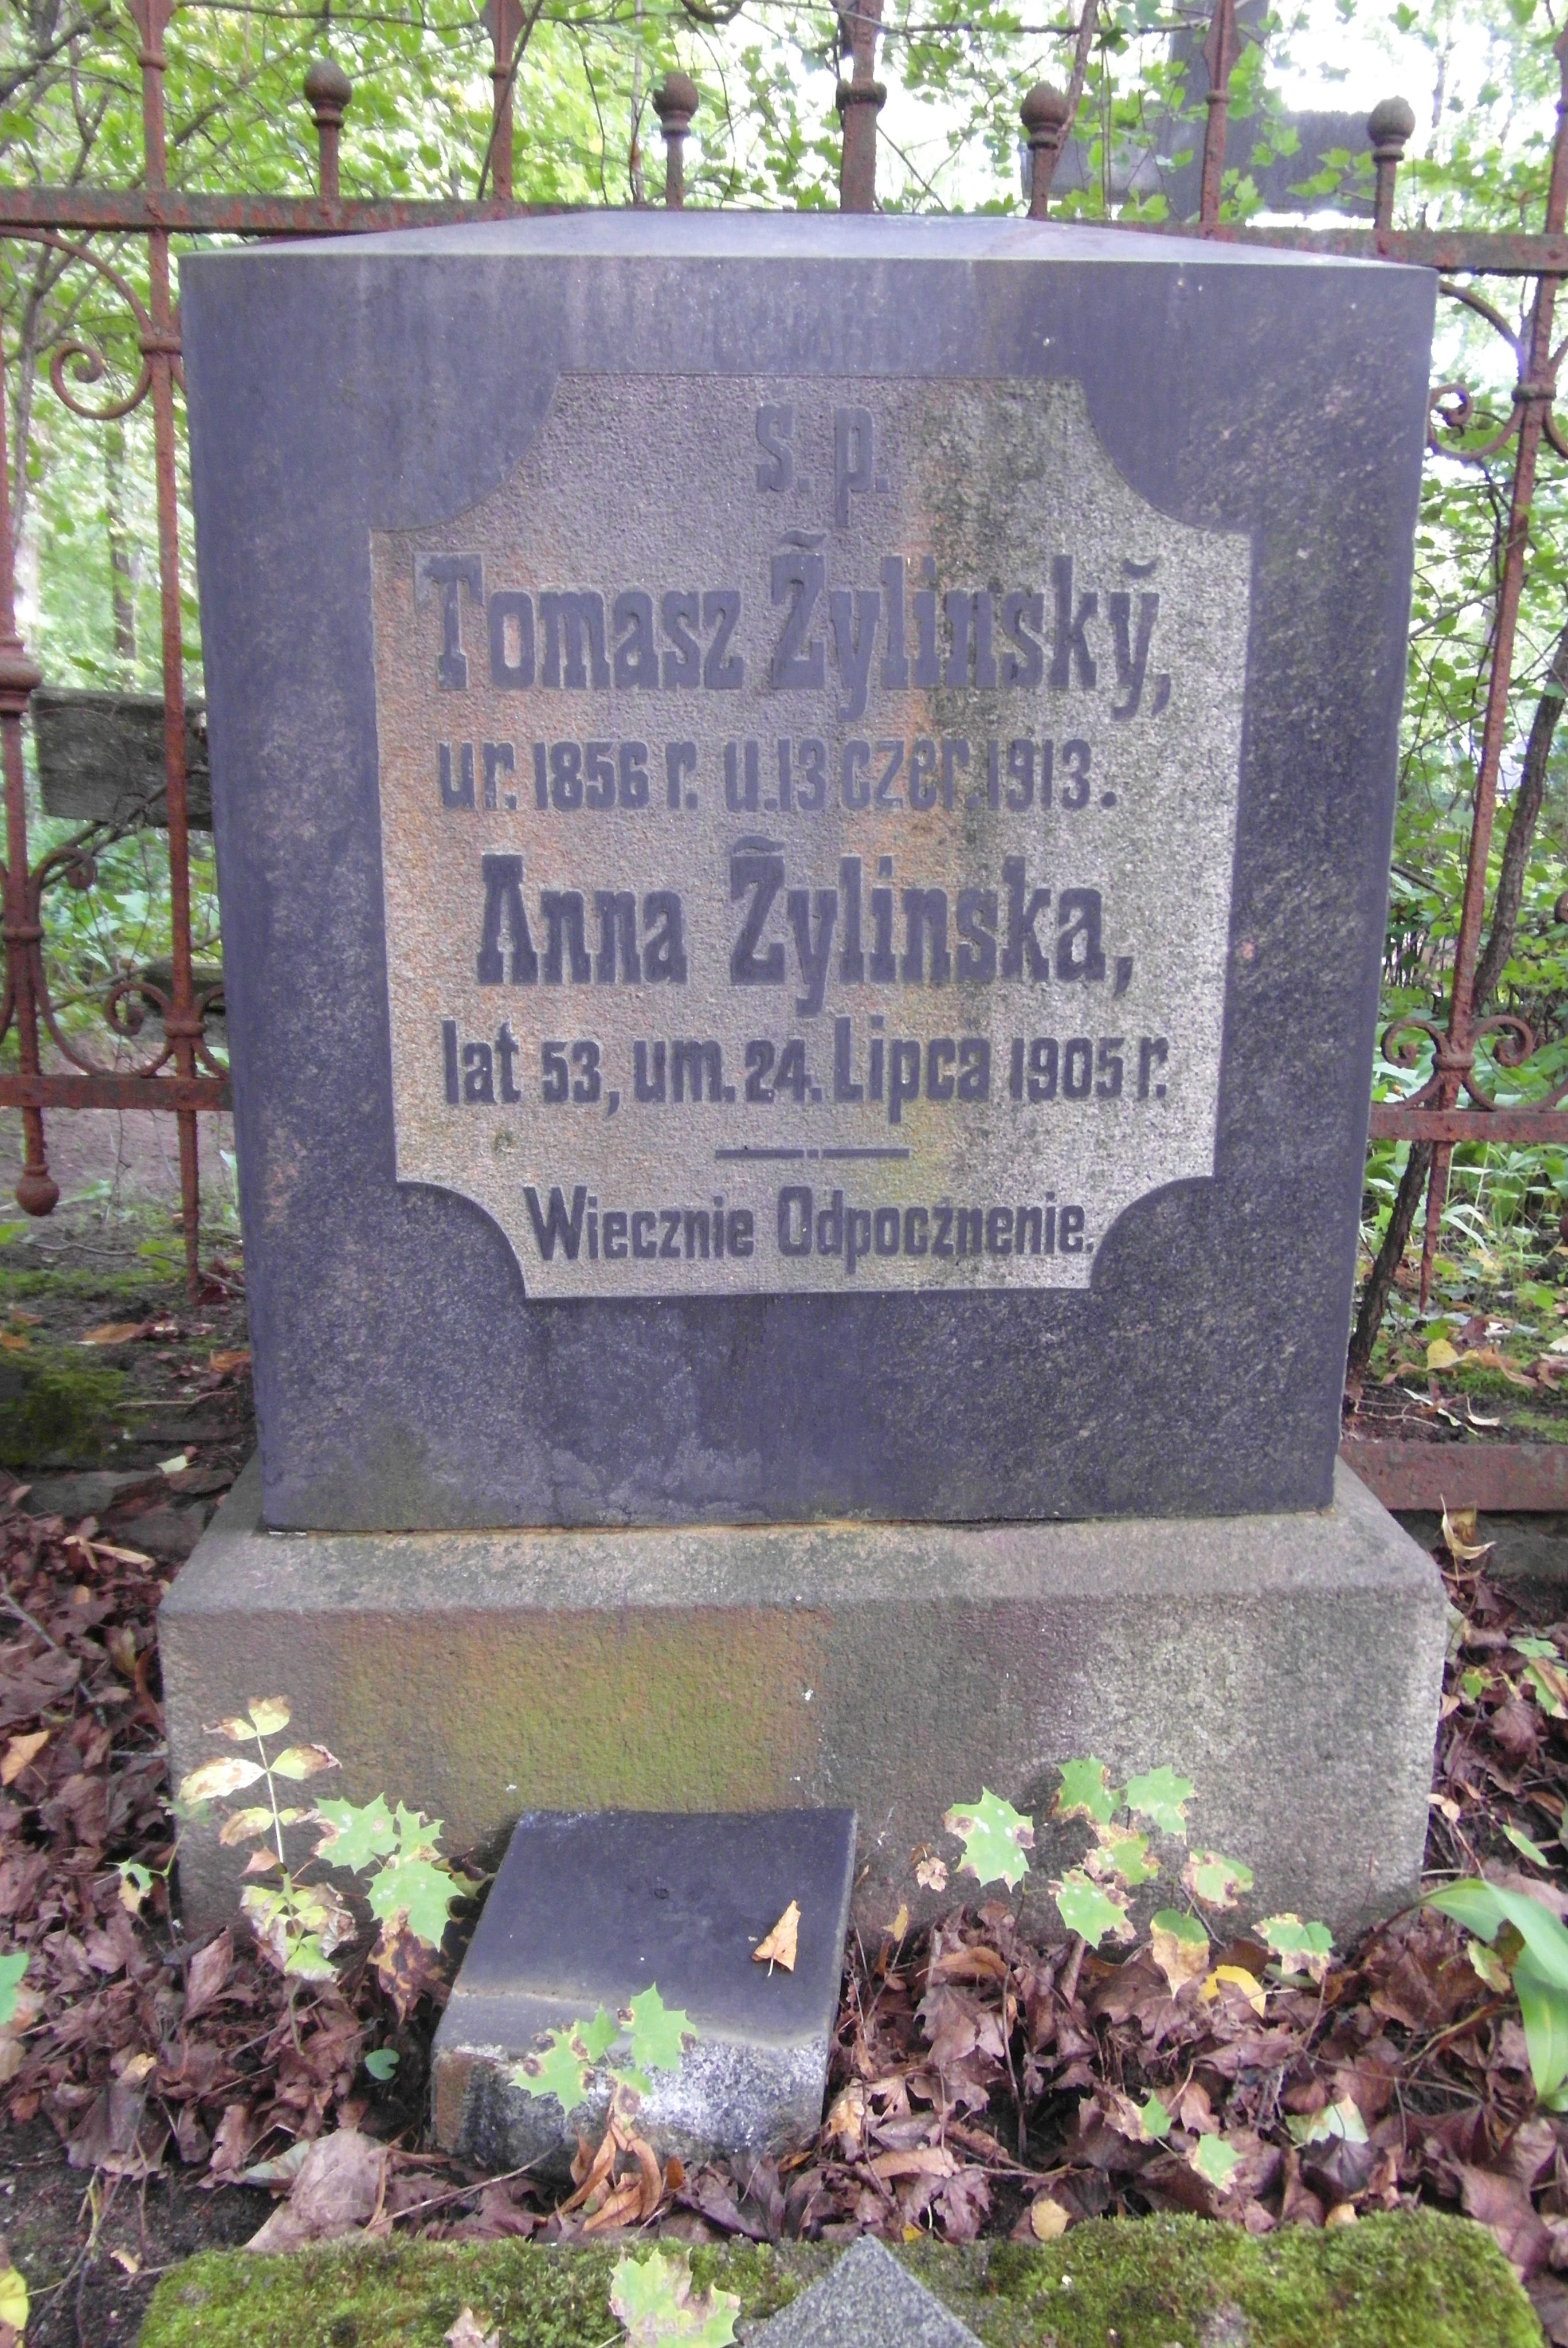 Inscription from the tombstone of Tomas Zylinsky, St Michael's cemetery in Riga, as of 2021.